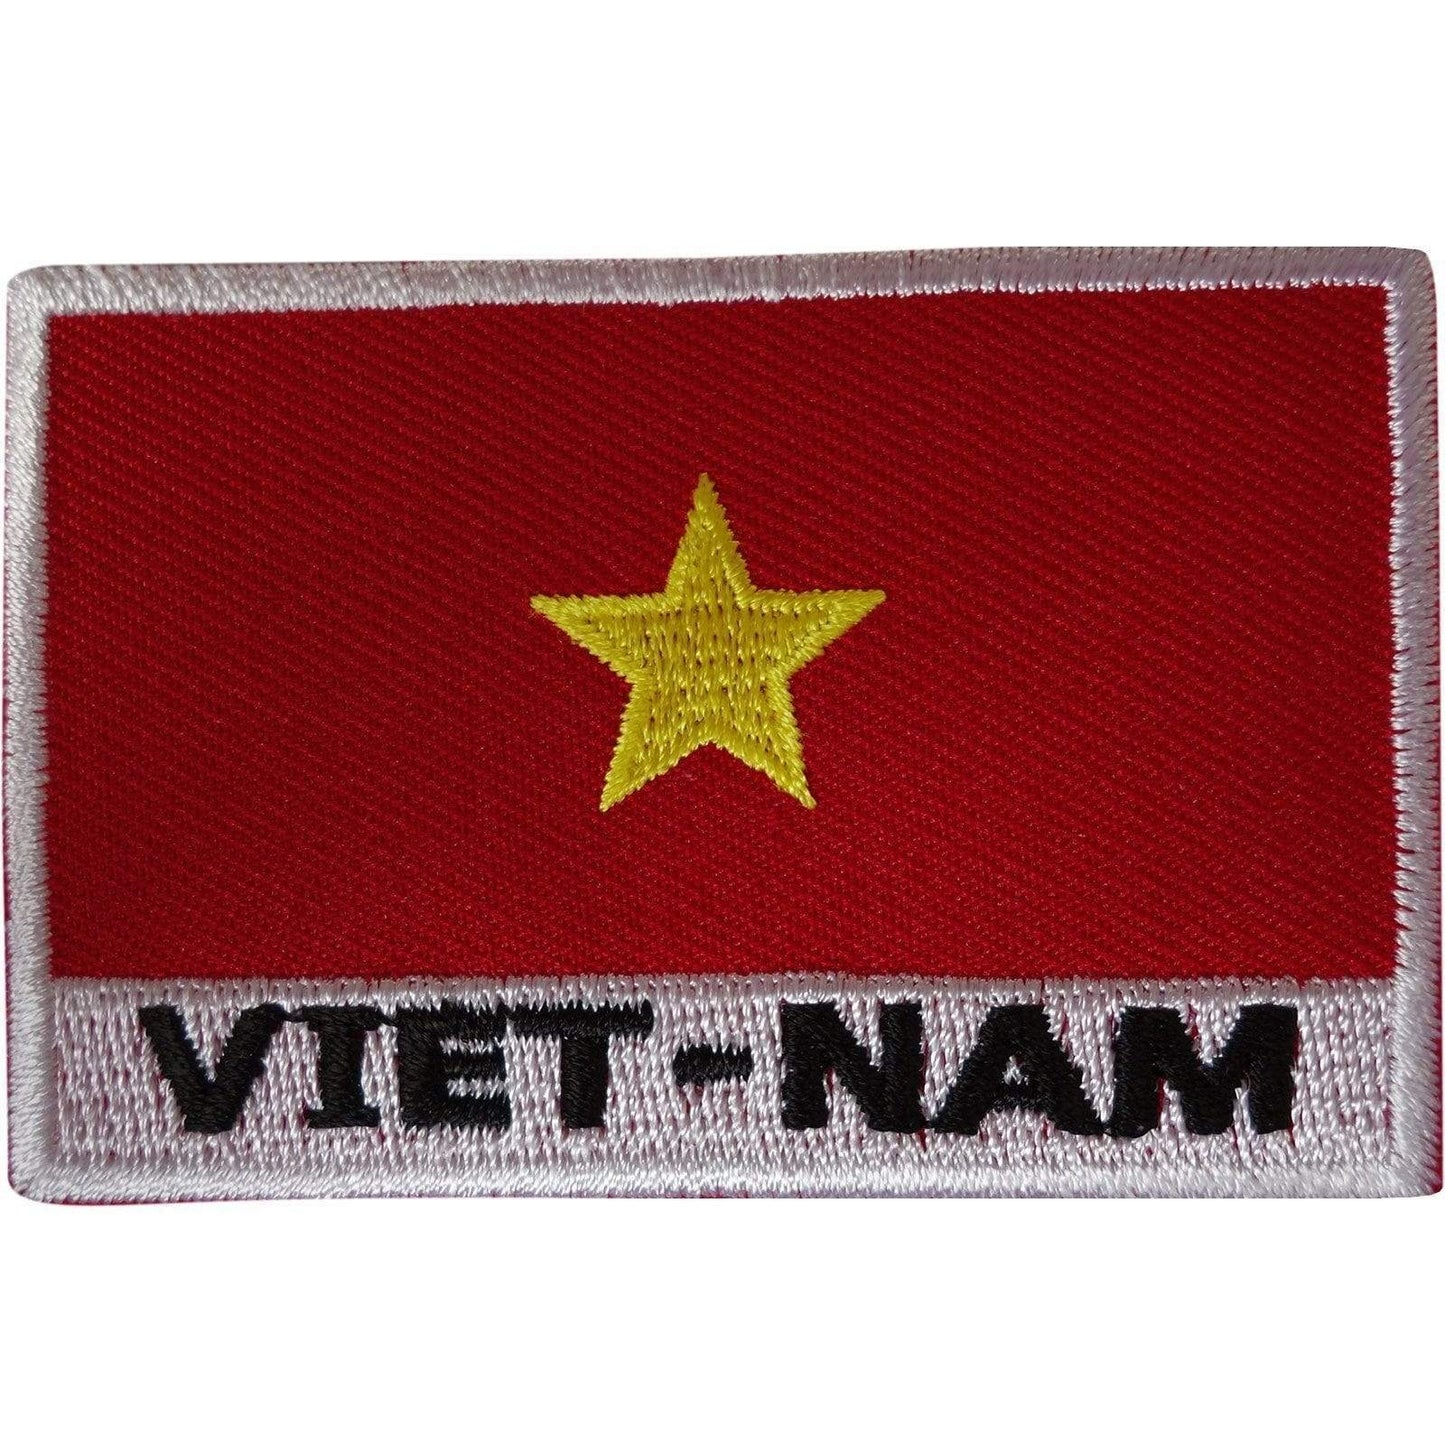 Vietnam Flag Patch Iron Sew On Embroidered Badge Vietnamese Embroidery Applique